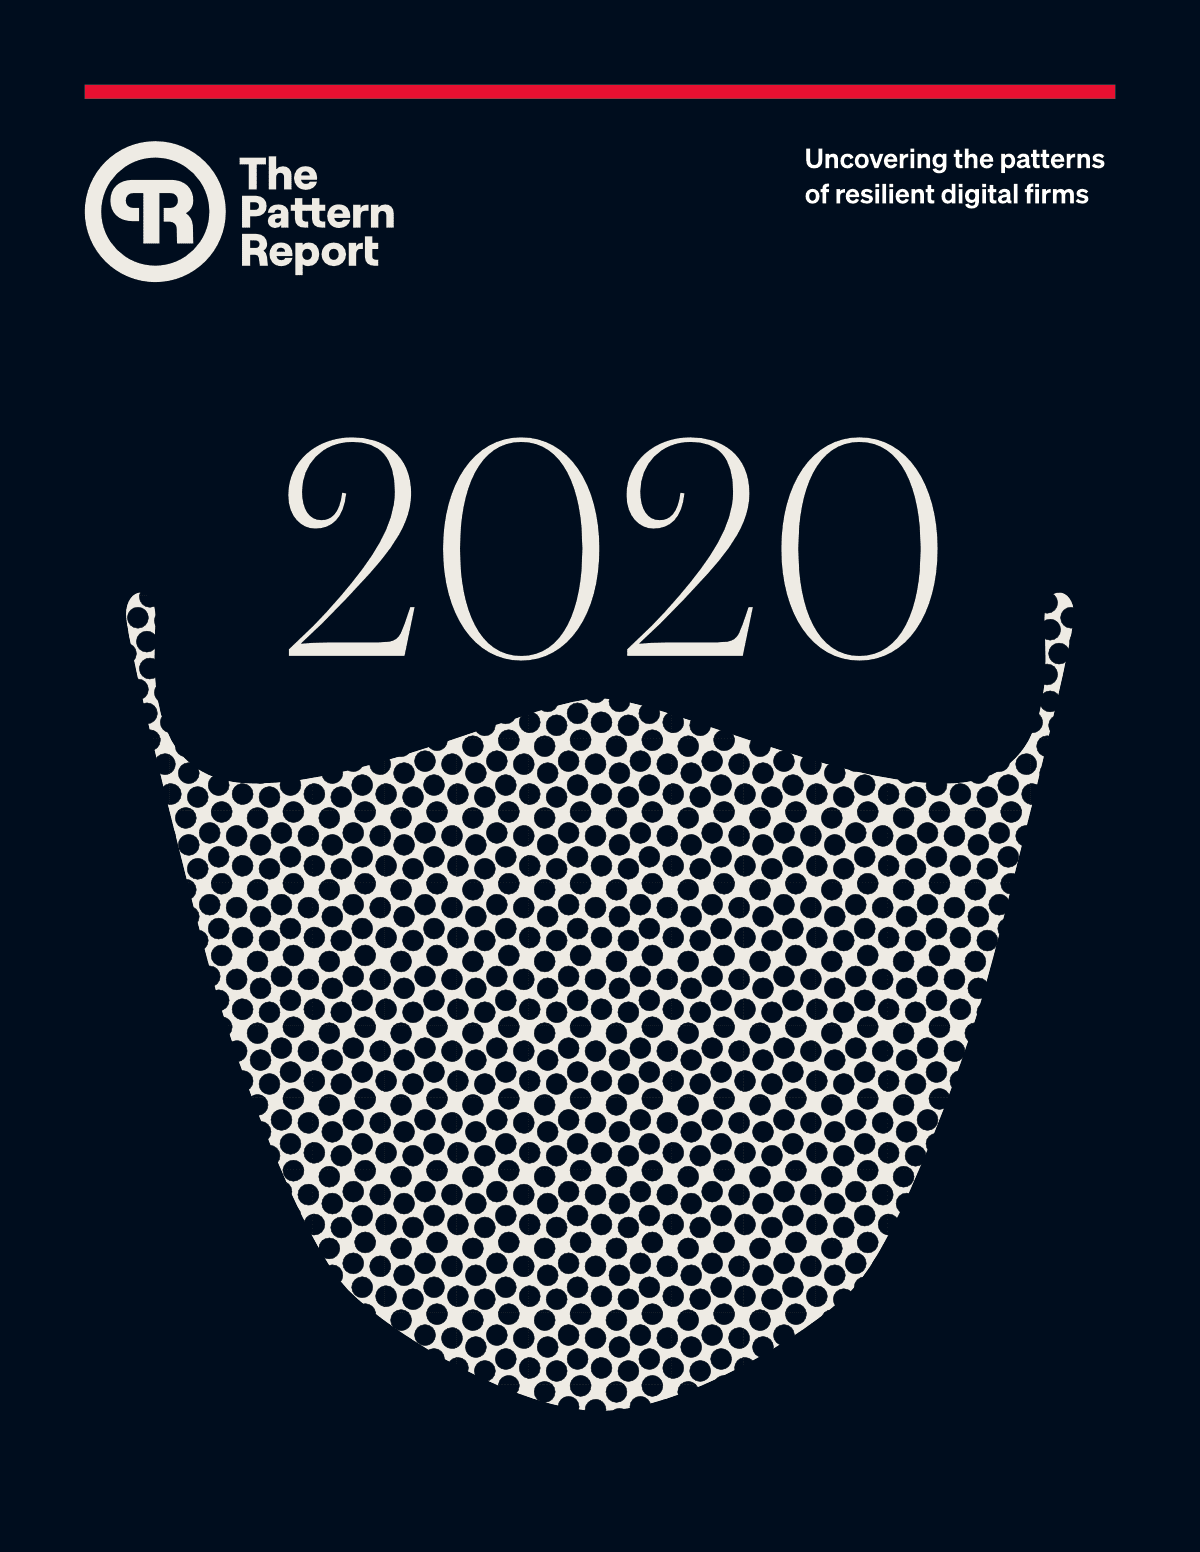 The 2020 Pattern Report cover